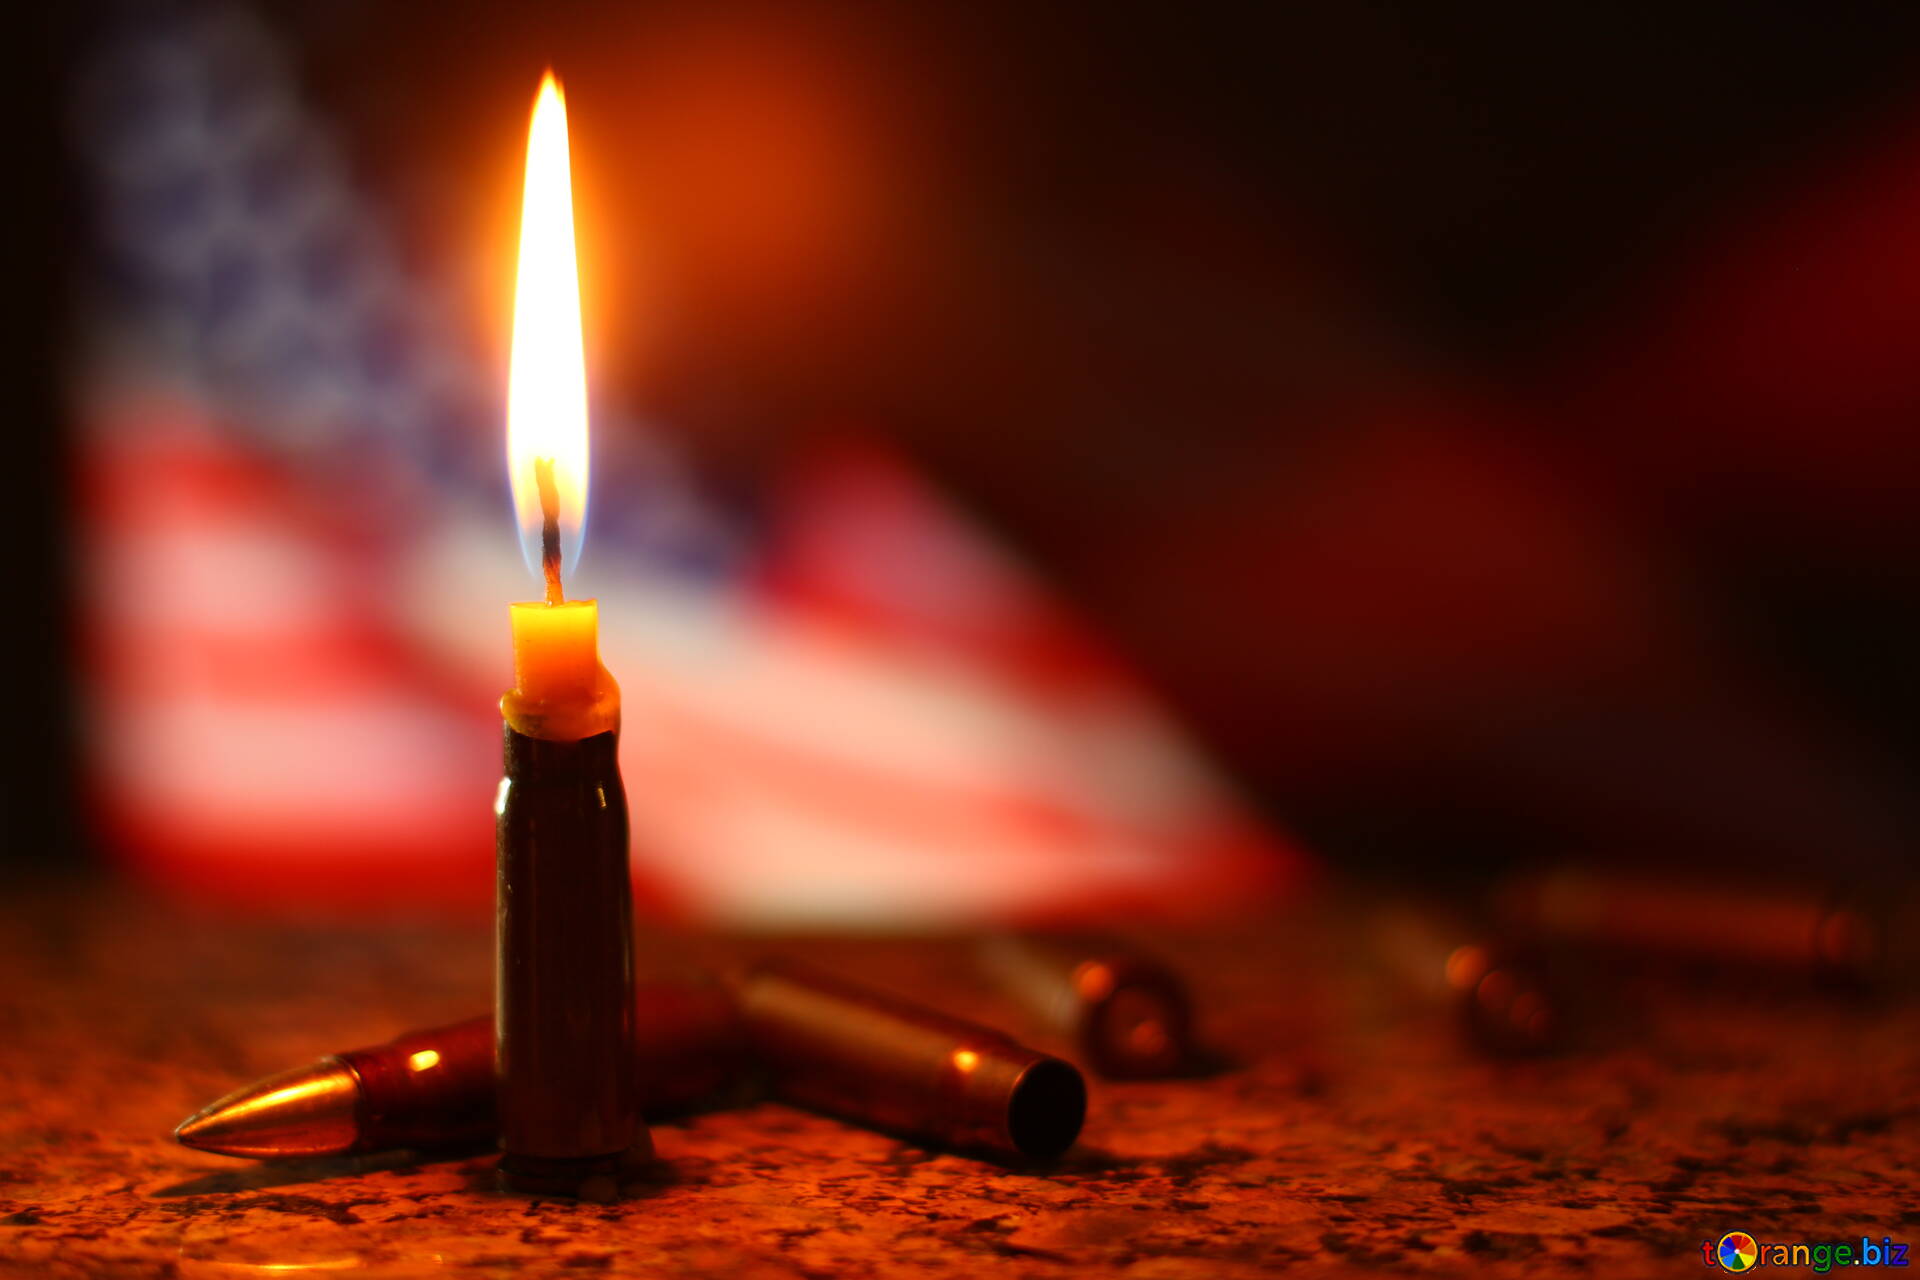 Mourning candles image in loving memory candle bullet us flag images candle  № 52516  ~ free pics on cc-by license